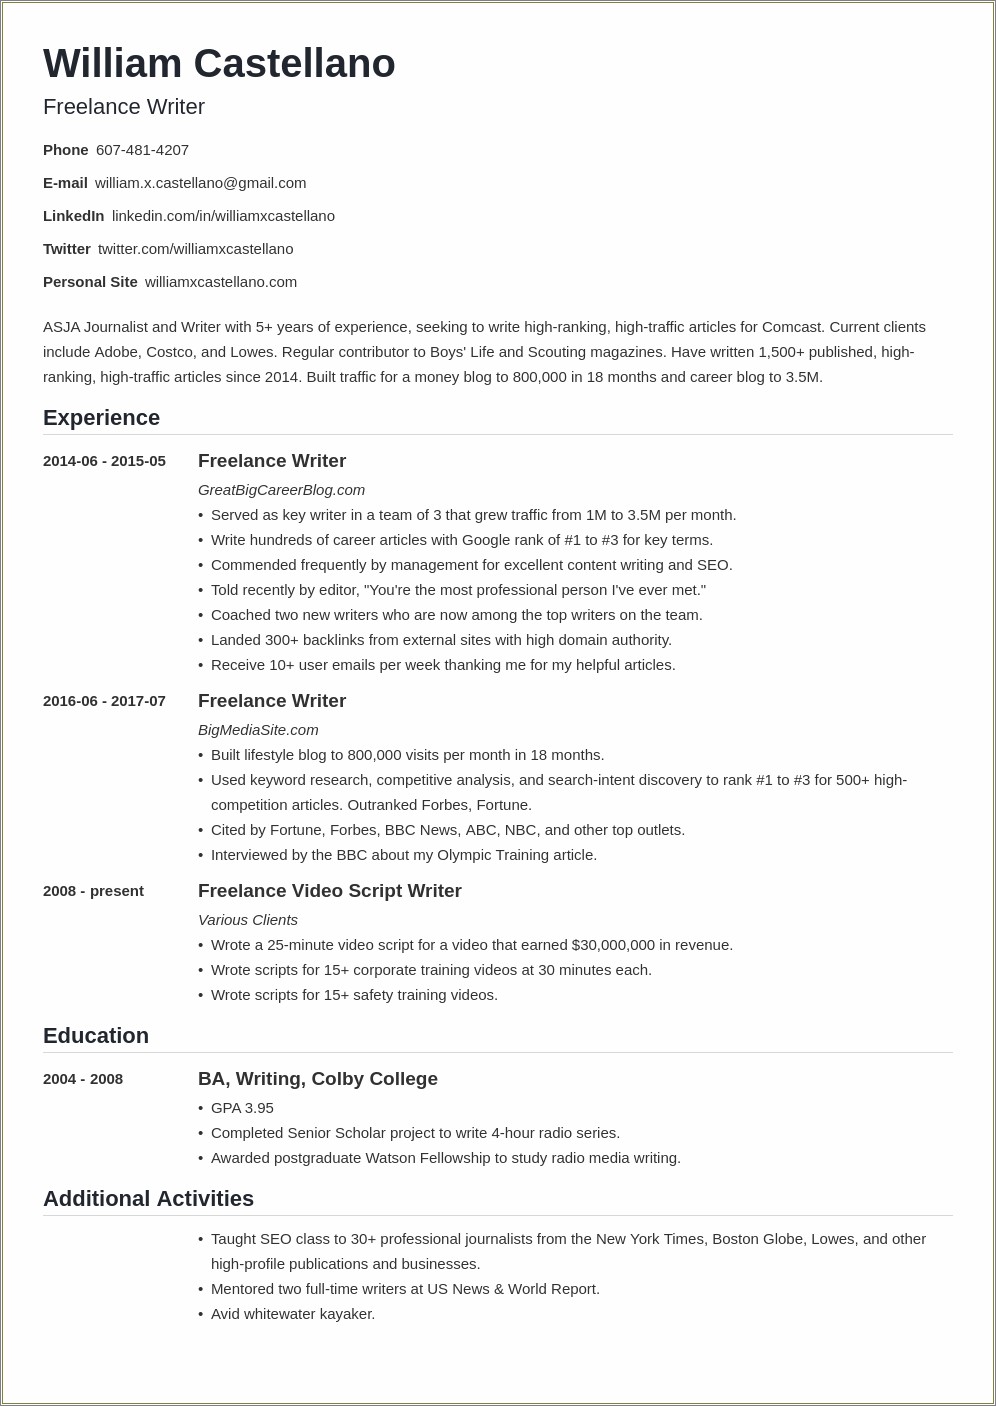 Listing Multiply Jobs At Same Company On Resume